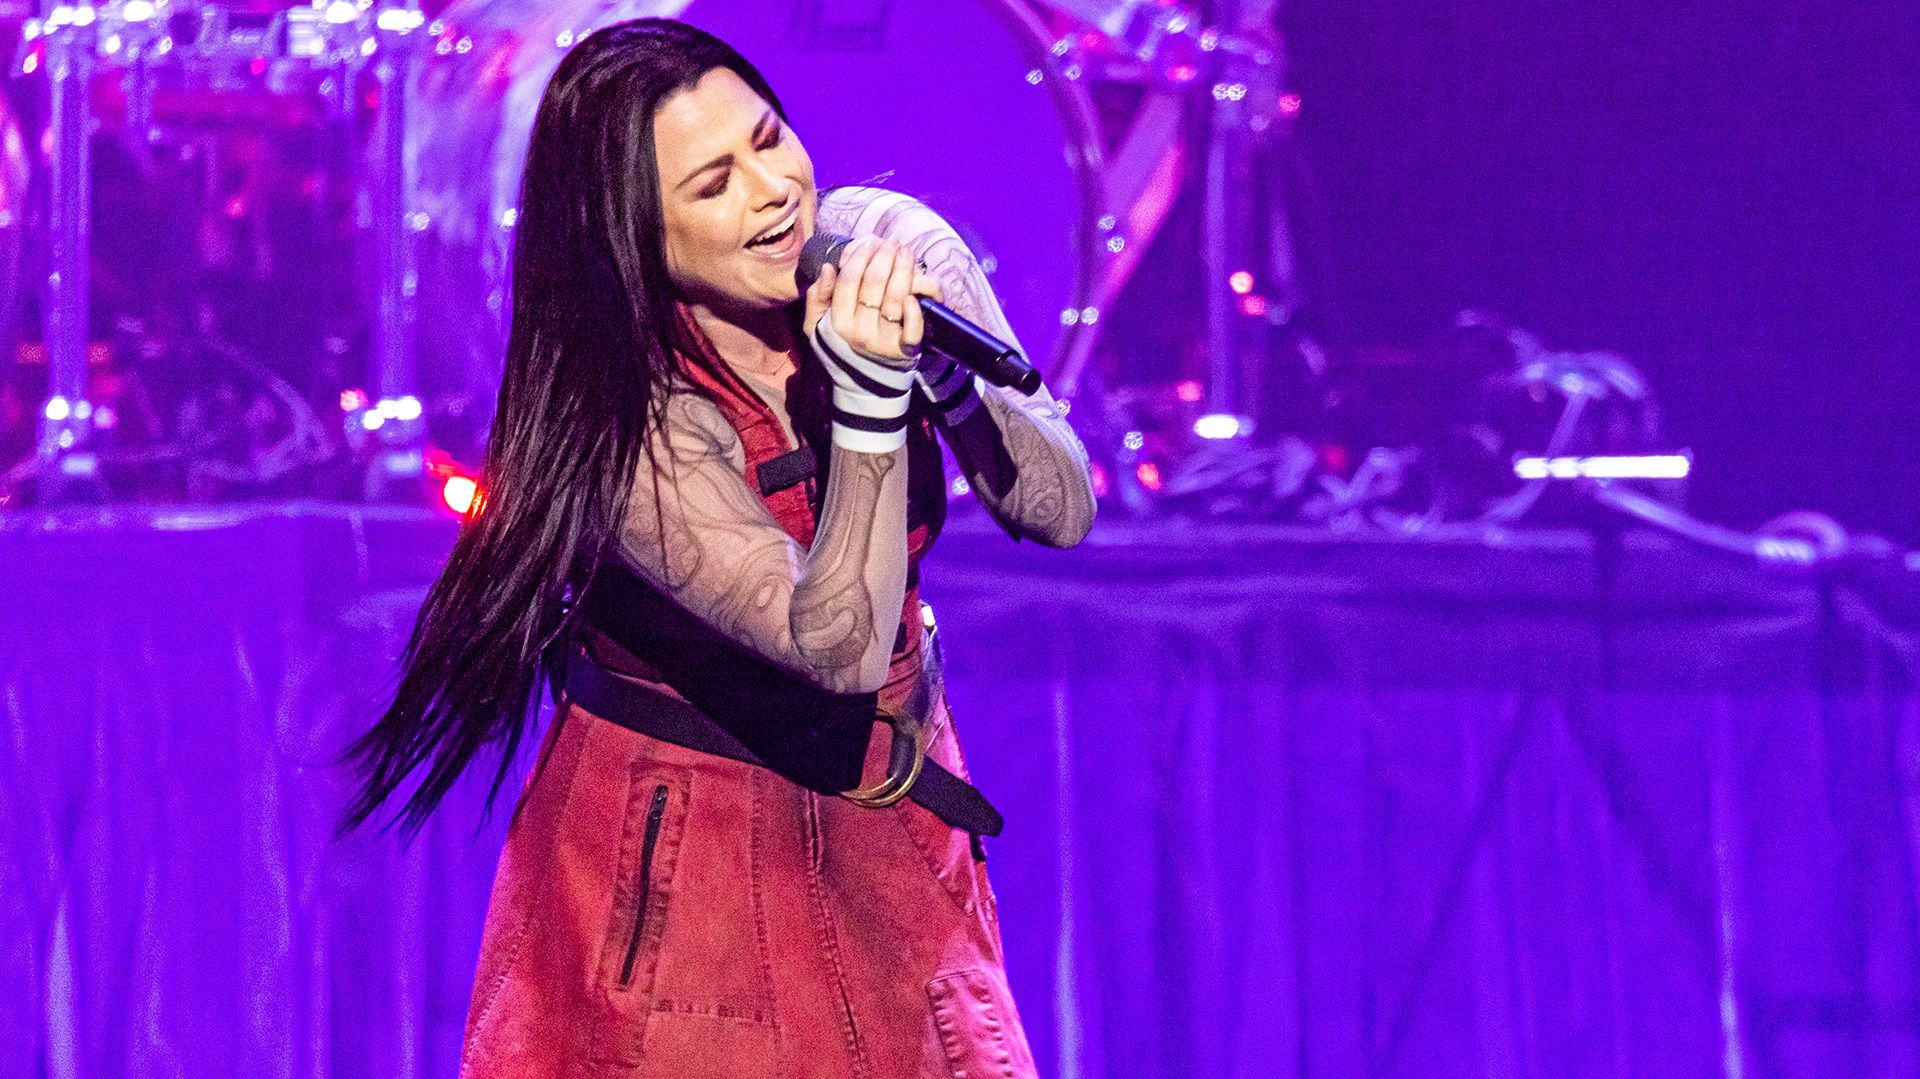 Amy lee shares the best song for introducing someone to evanescence music